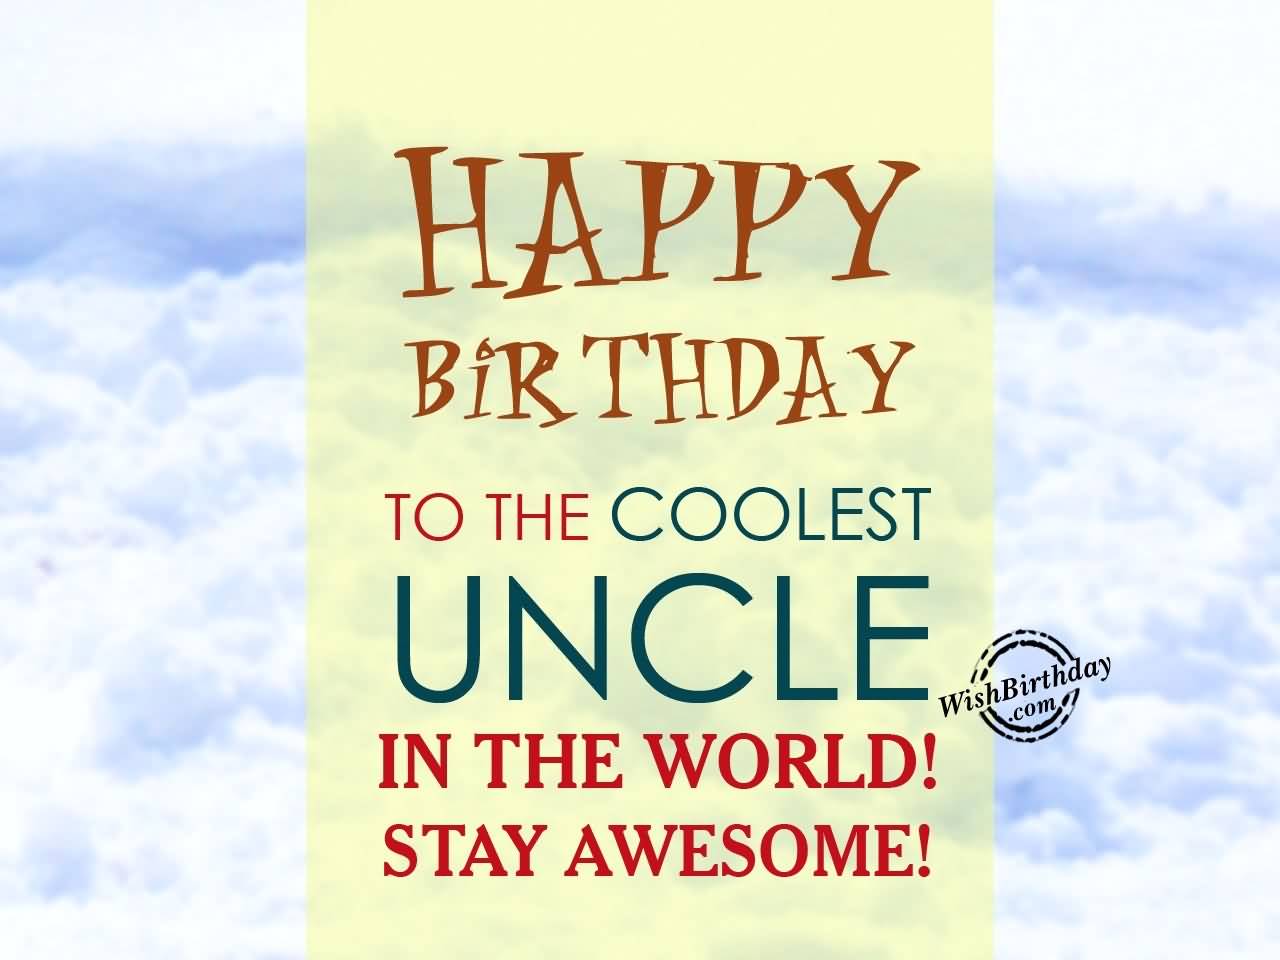 Happy Birthday to the coolest Uncle in this world great wishes and blessings for you